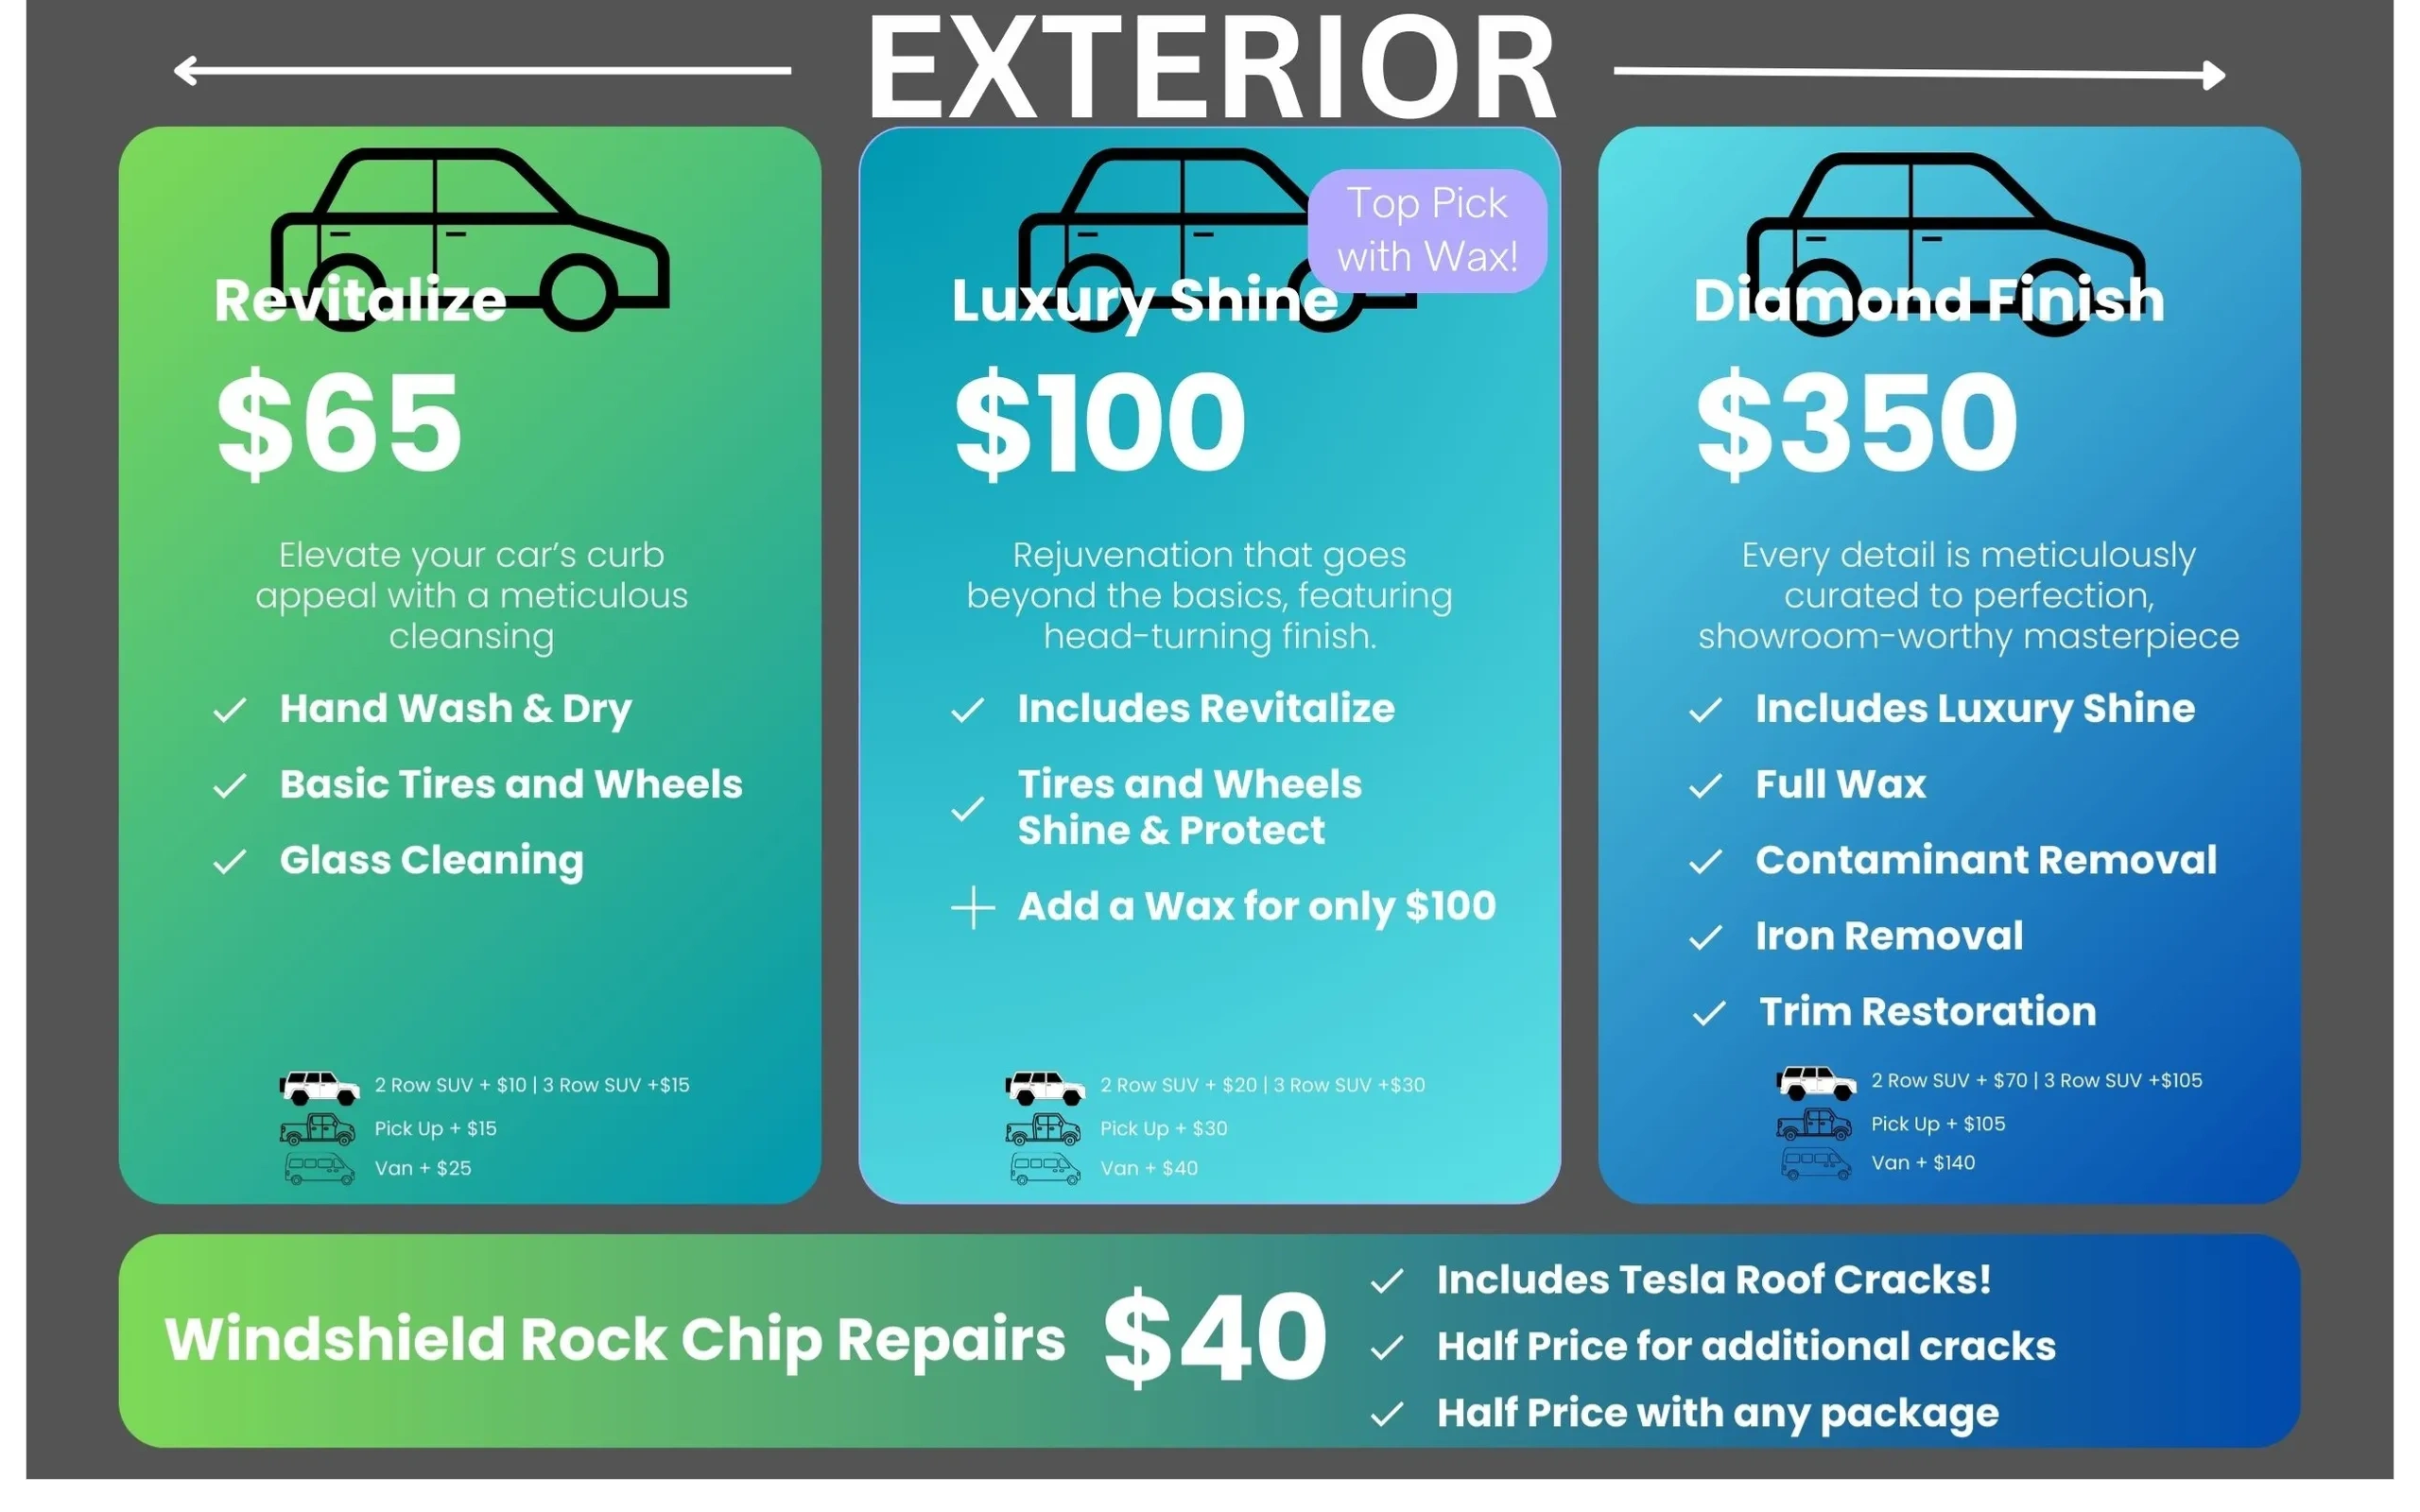 Exterior package pricing for auto detailing